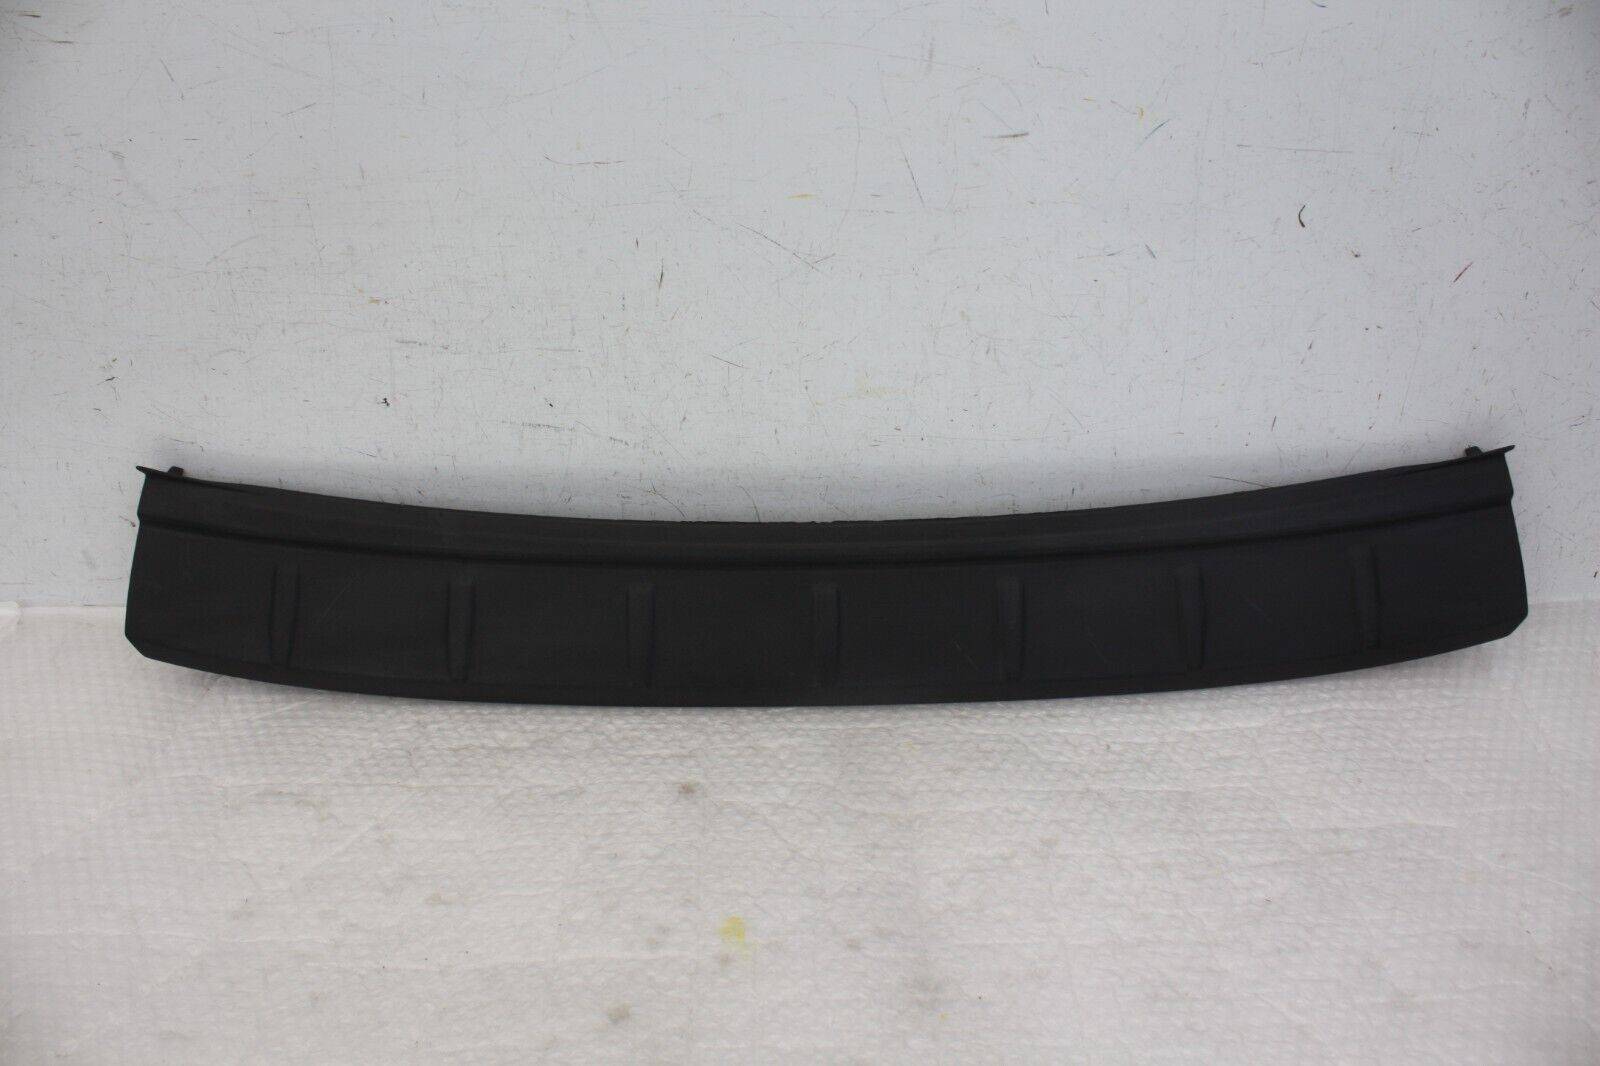 Volvo XC60 Rear Bumper Protection Cover 30764525 Genuine FIXING DAMAGED 176362657810